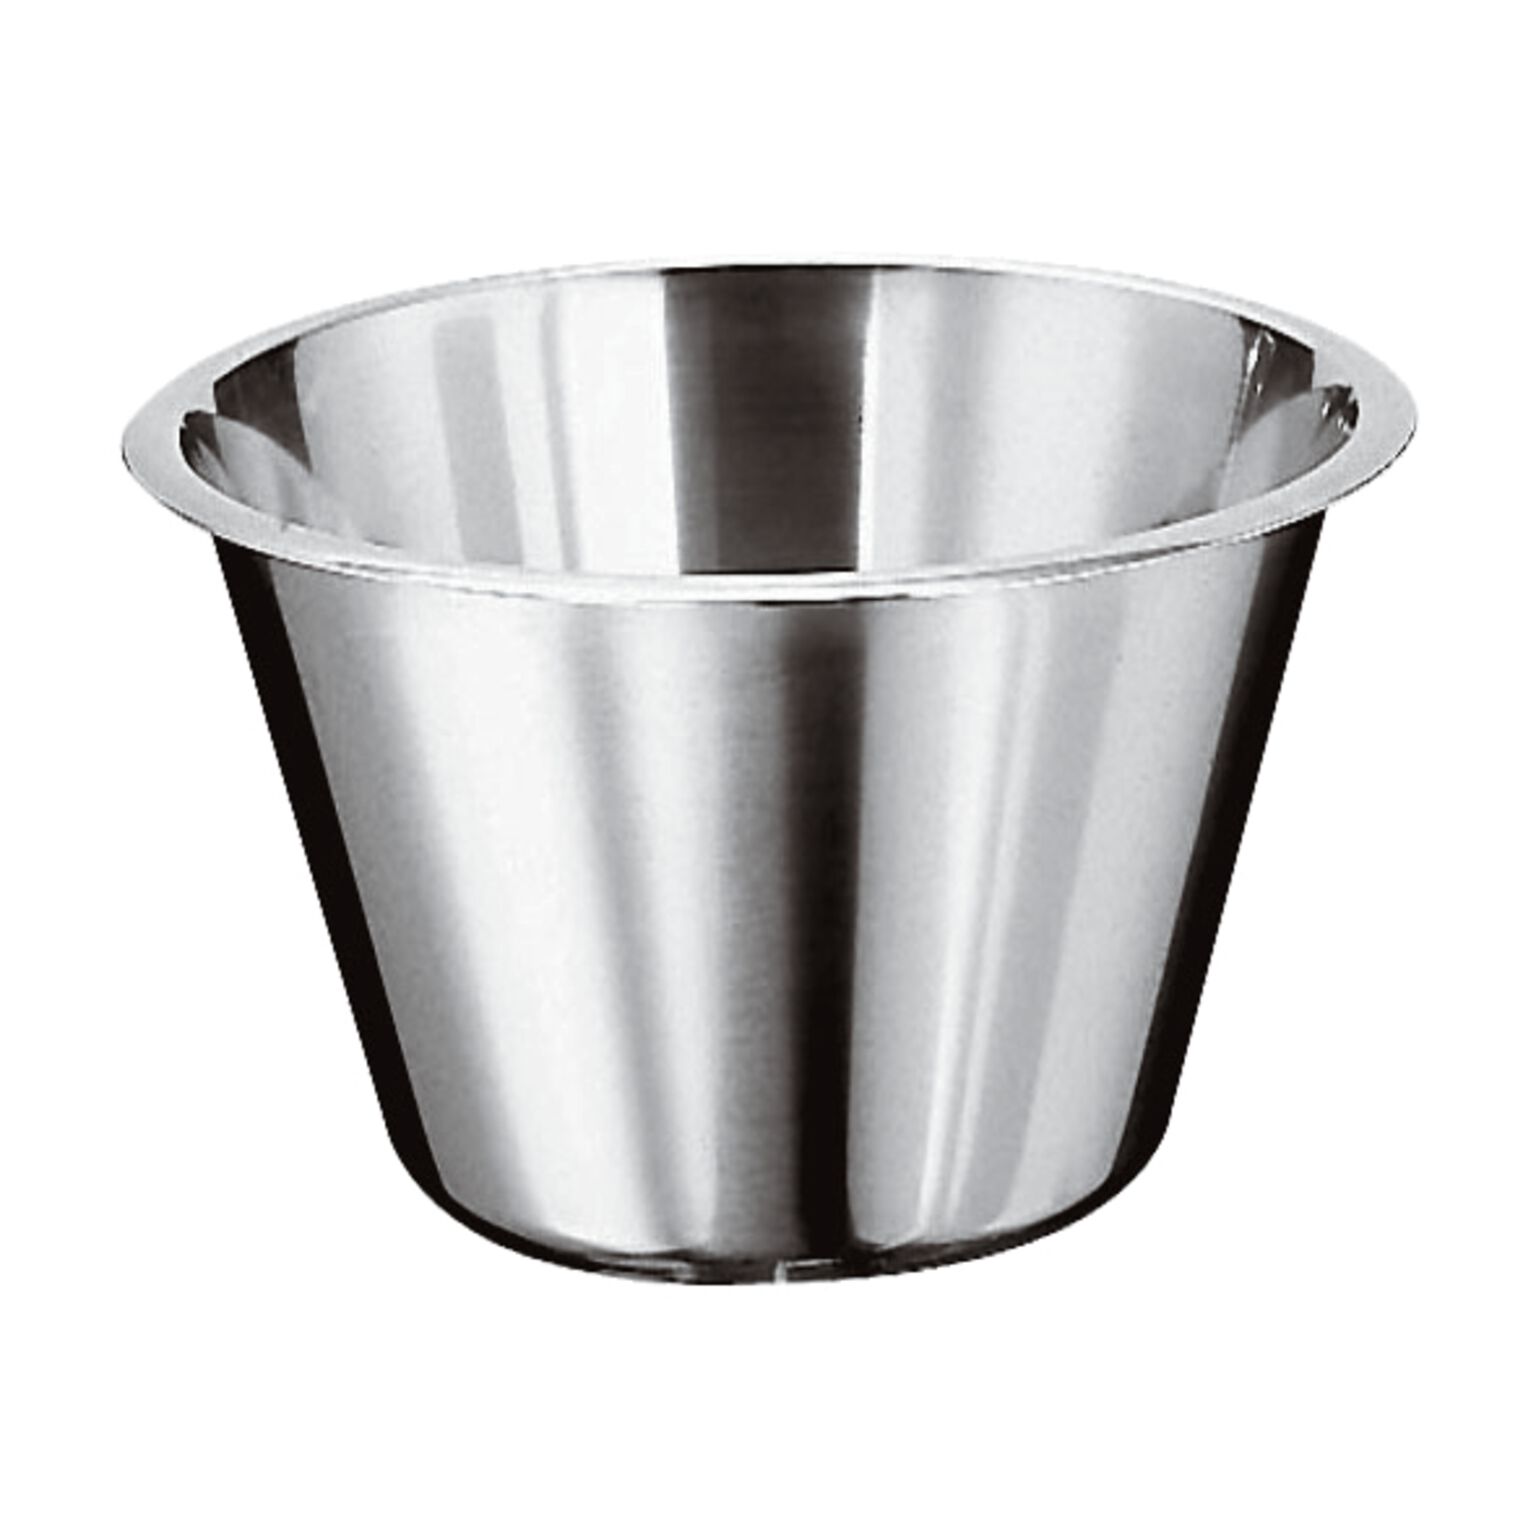 Mixing bowls: high, low, stainless steel | Paderno